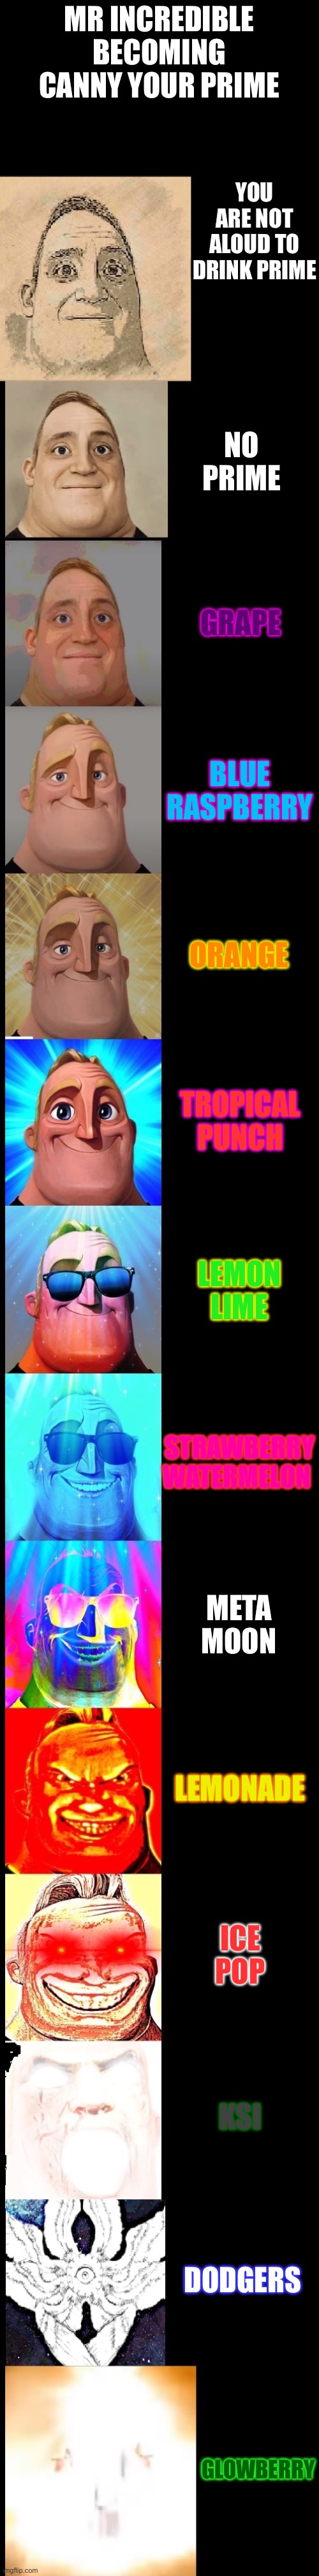 Mr Incredible becoming Canny and Uncanny Meme - Imgflip